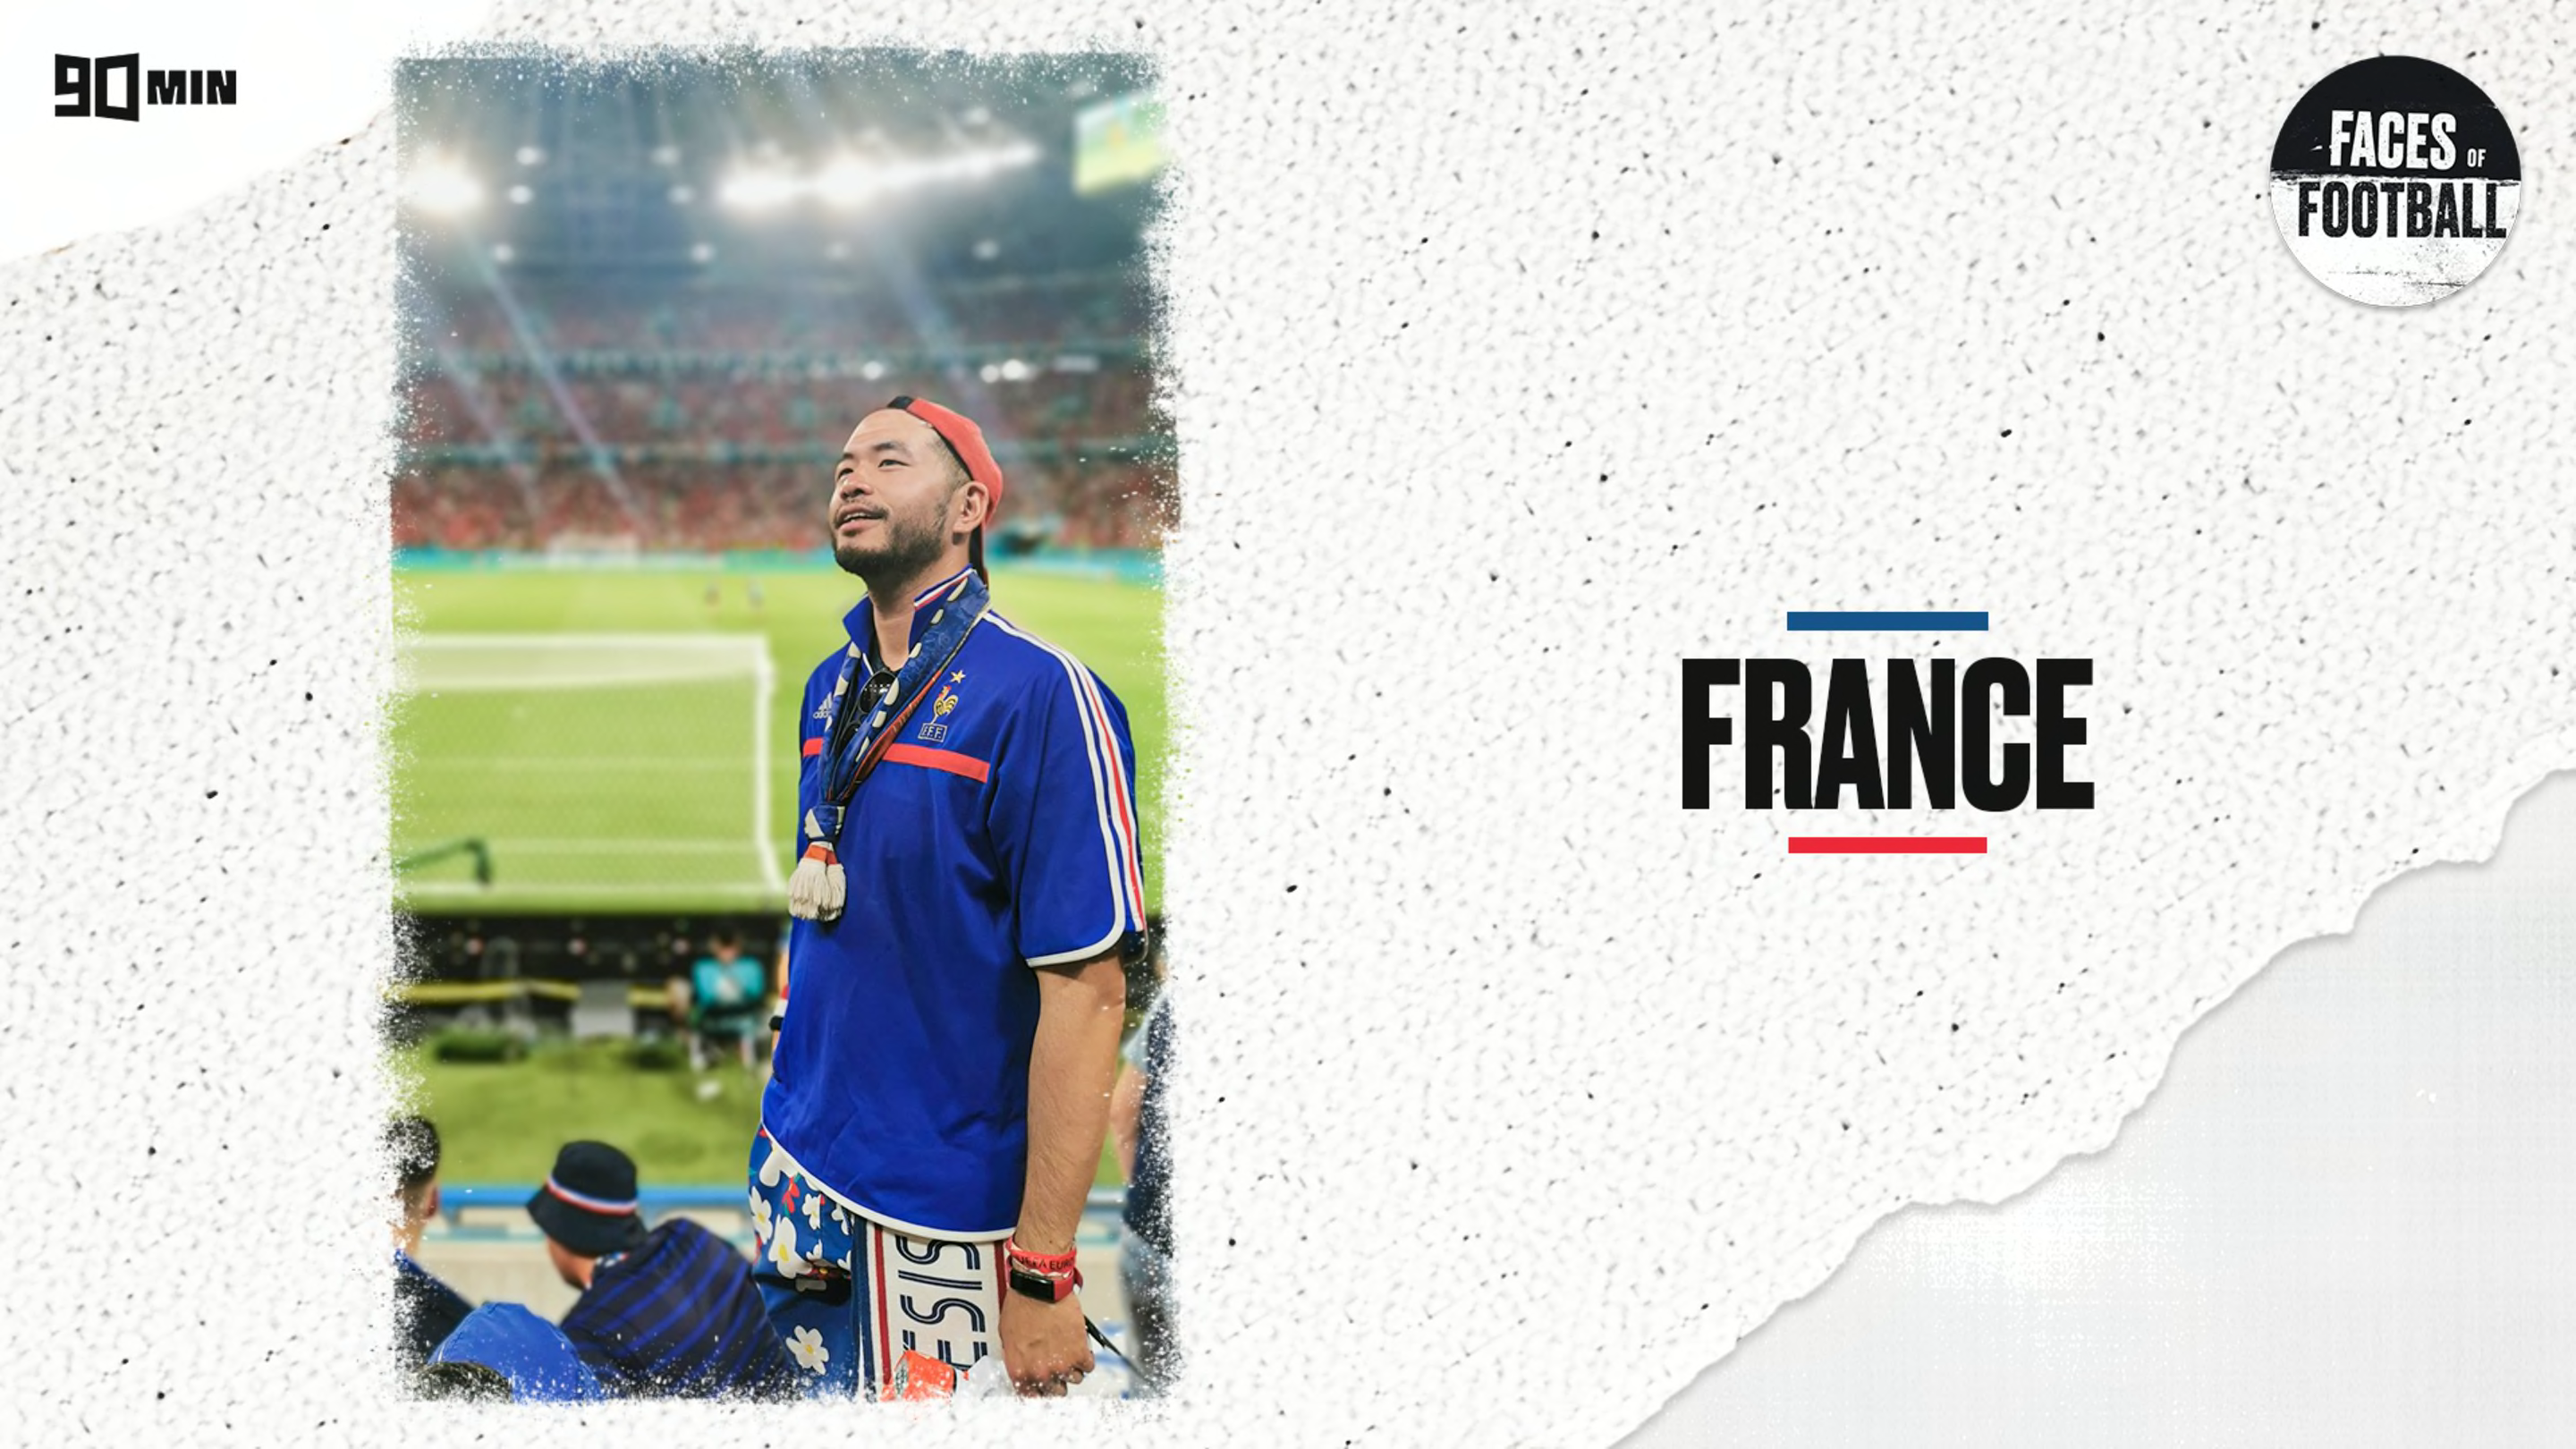 Faces of Football: France - a letter to the national team